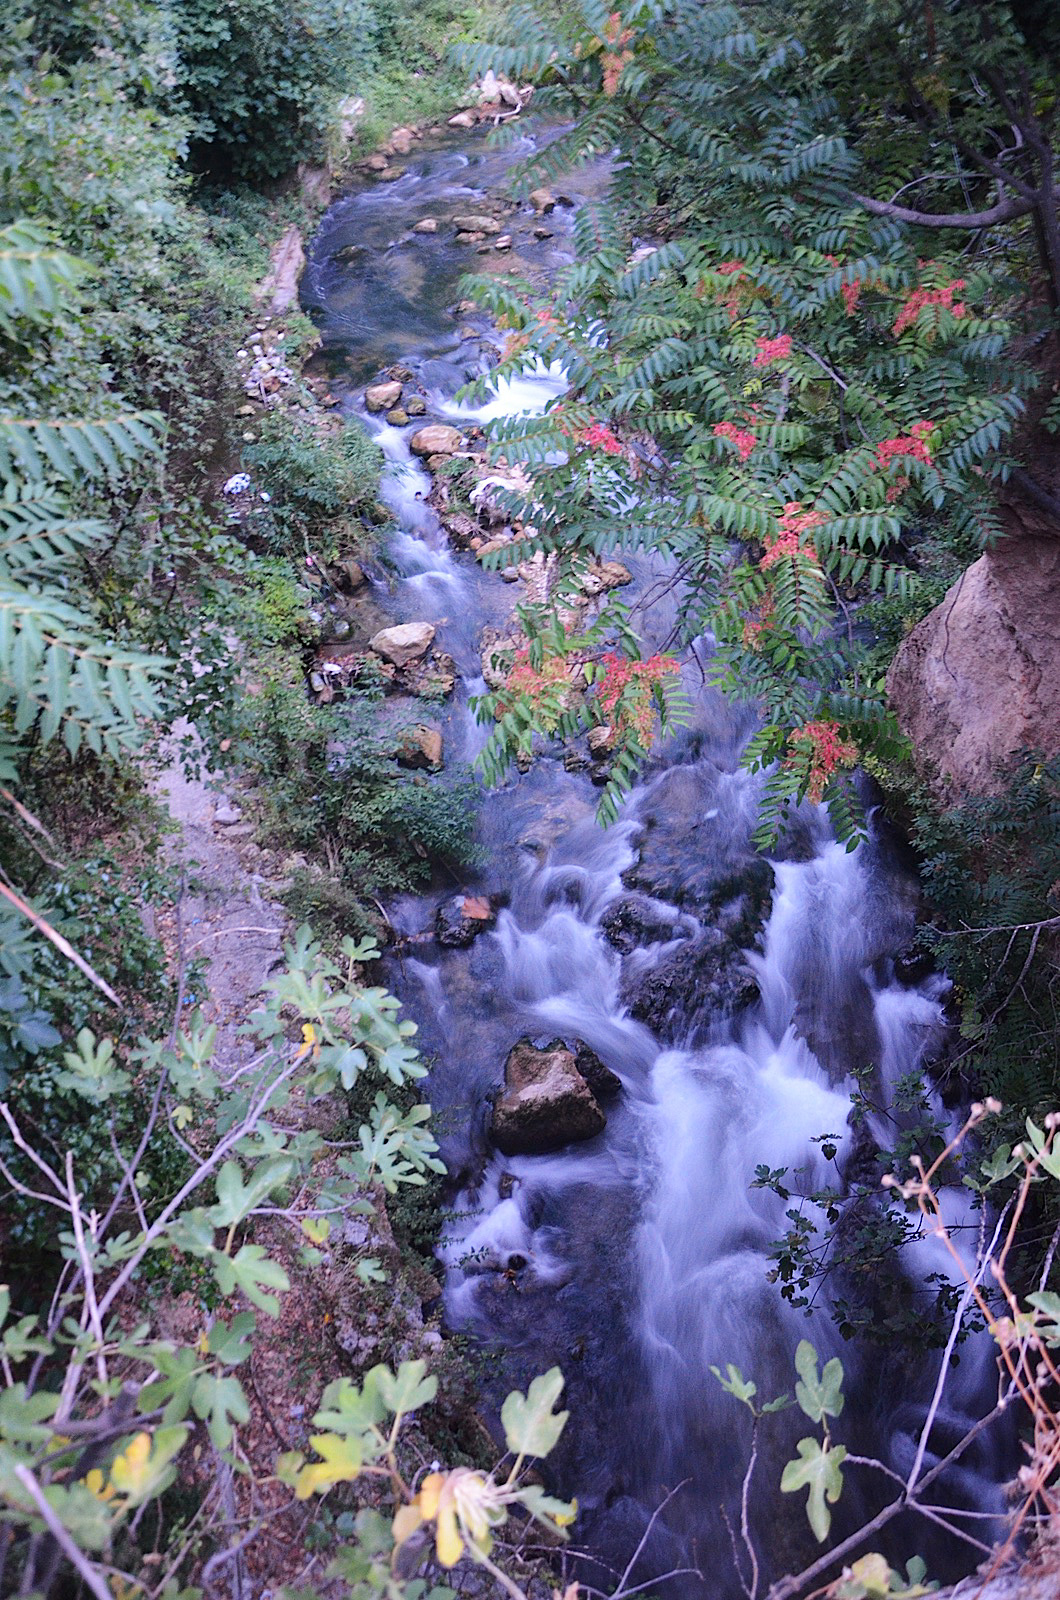 flowing creek and stream surrounded by trees and rocks